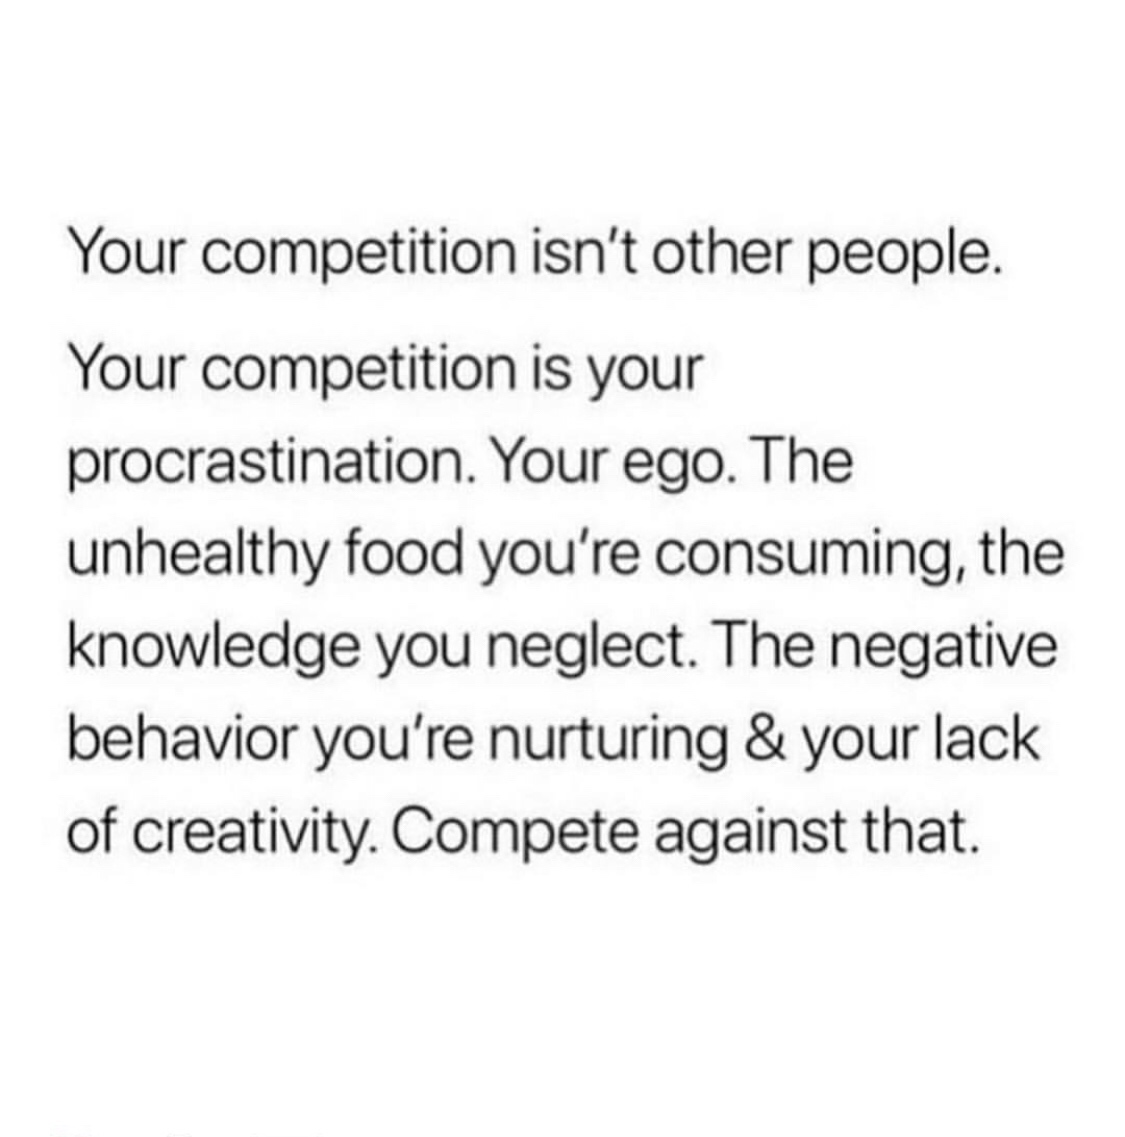 delivery of mentoanterior - Your competition isn't other people. Your competition is your procrastination. Your ego. The unhealthy food you're consuming, the knowledge you neglect. The negative behavior you're nurturing & your lack of creativity. Compete